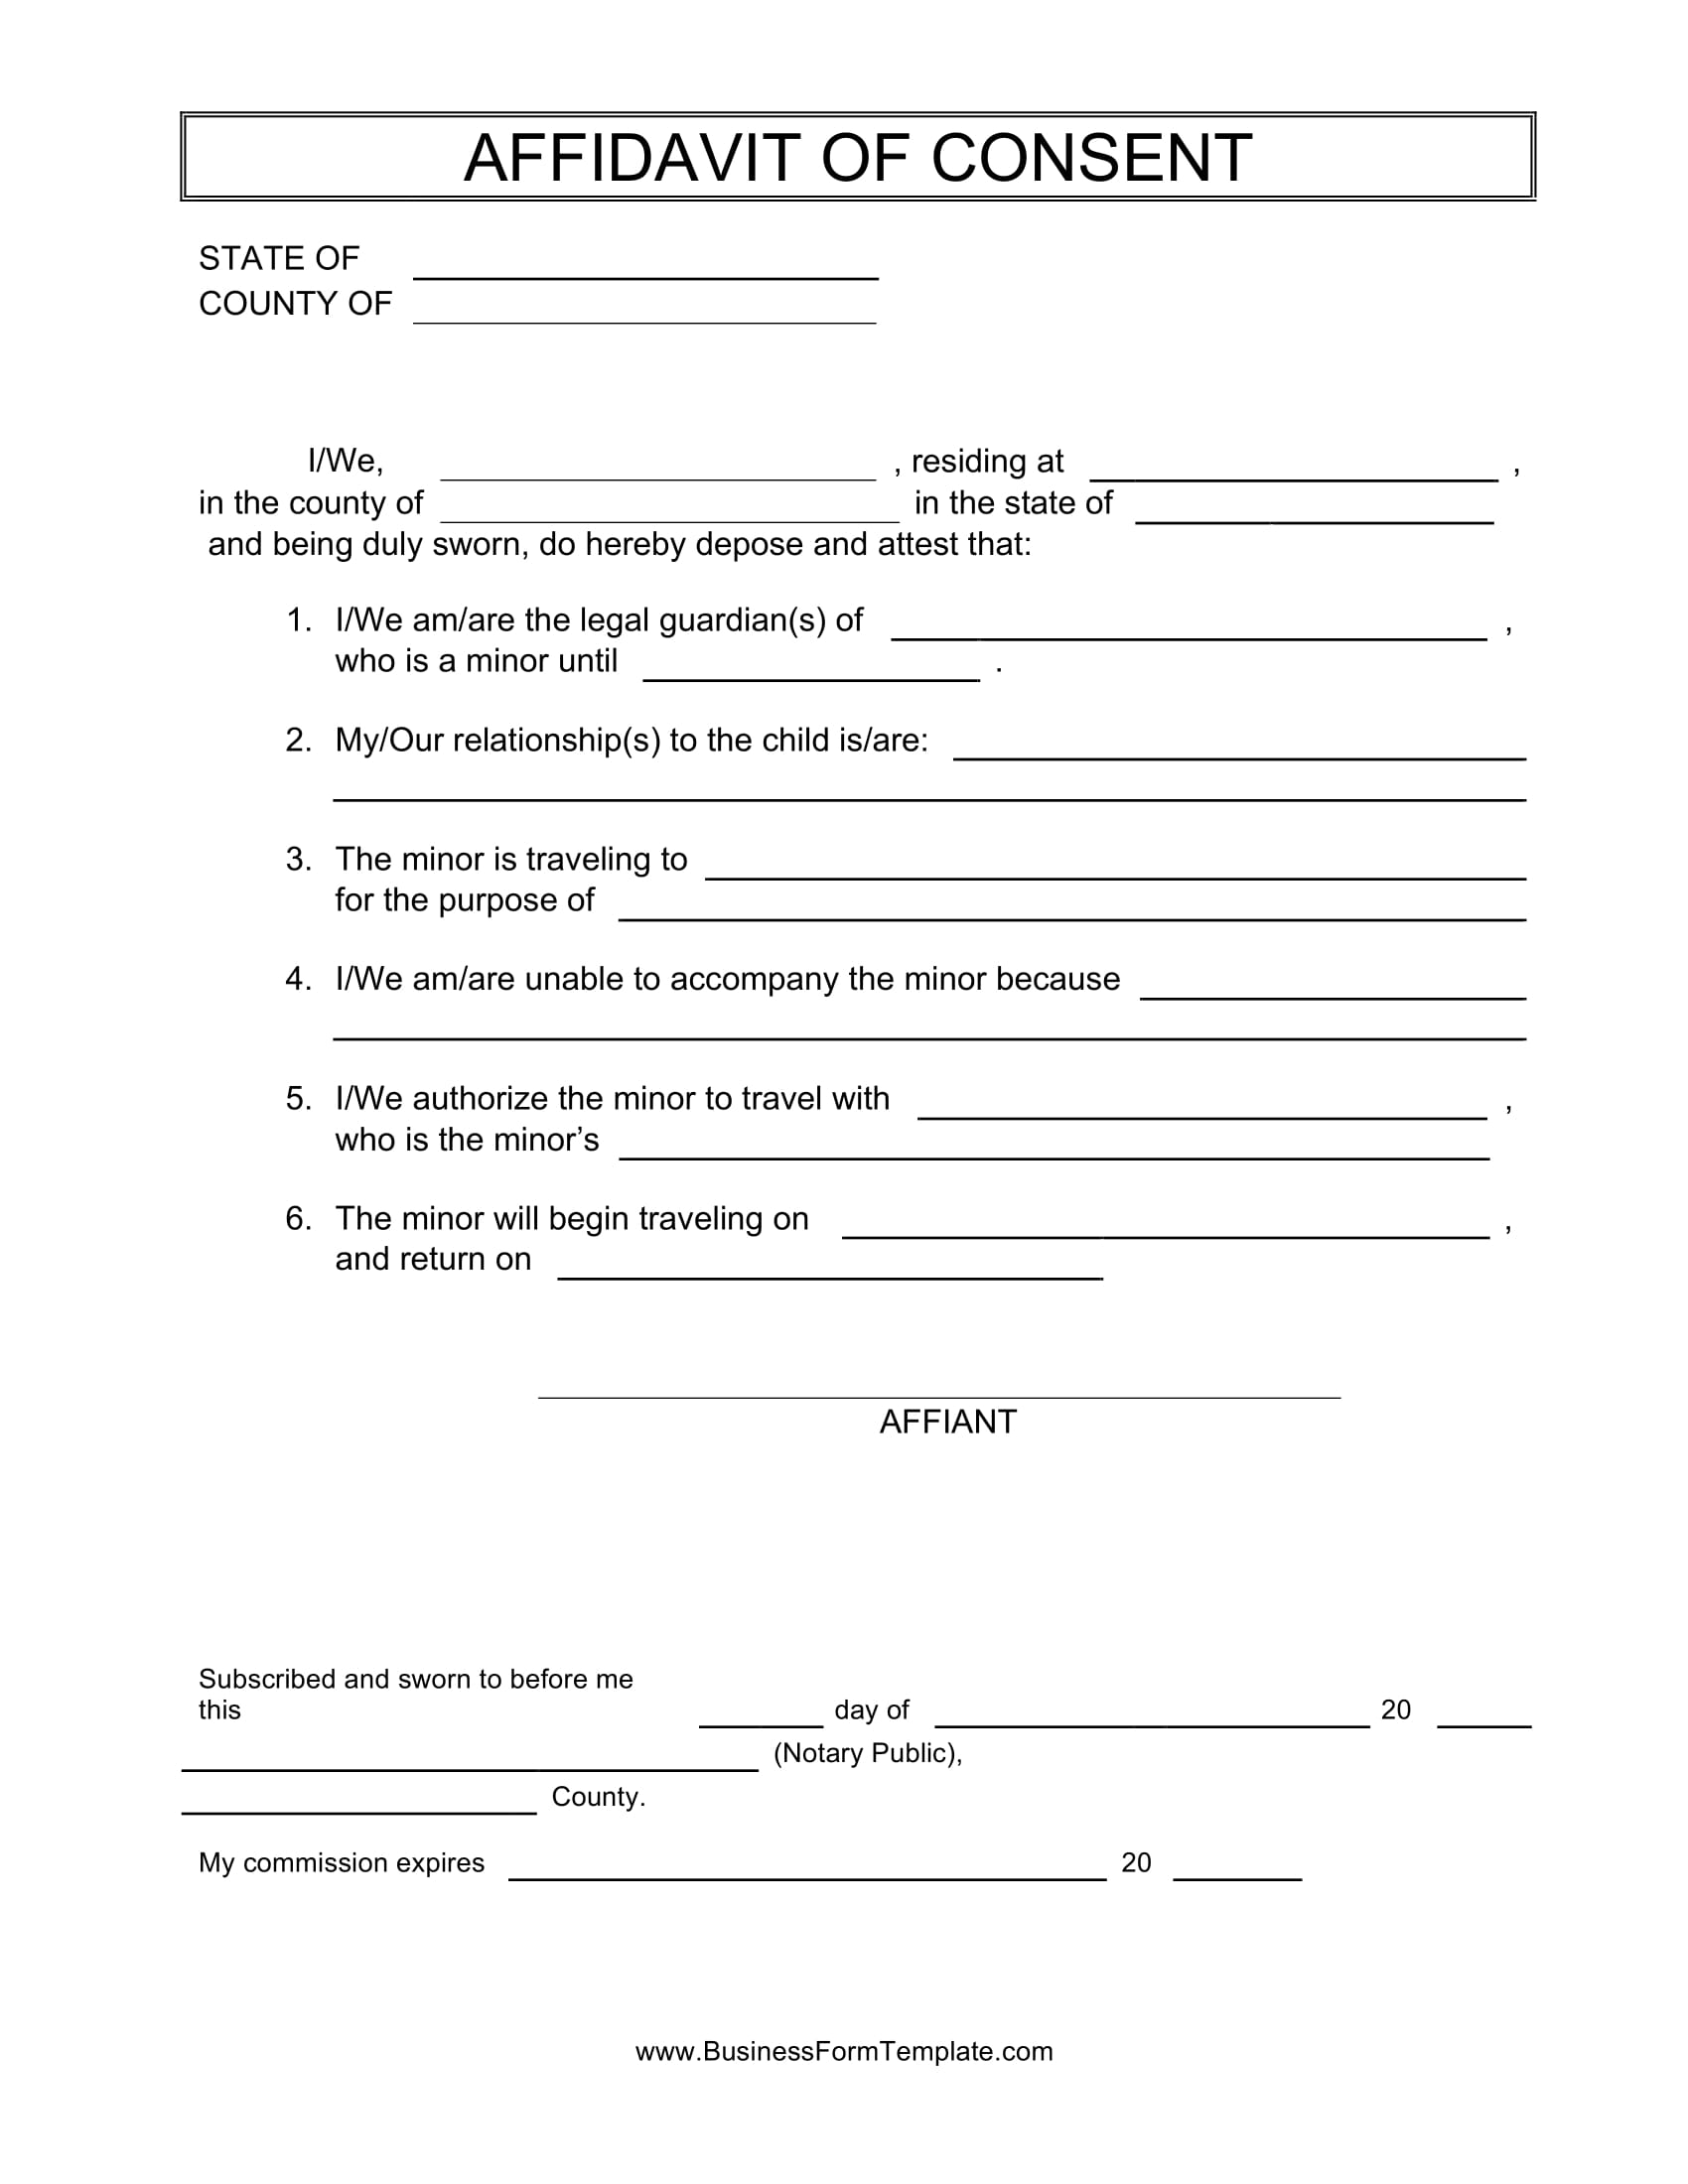 Affidavit Of Consent 10 Examples Format Pdf Examples 7950